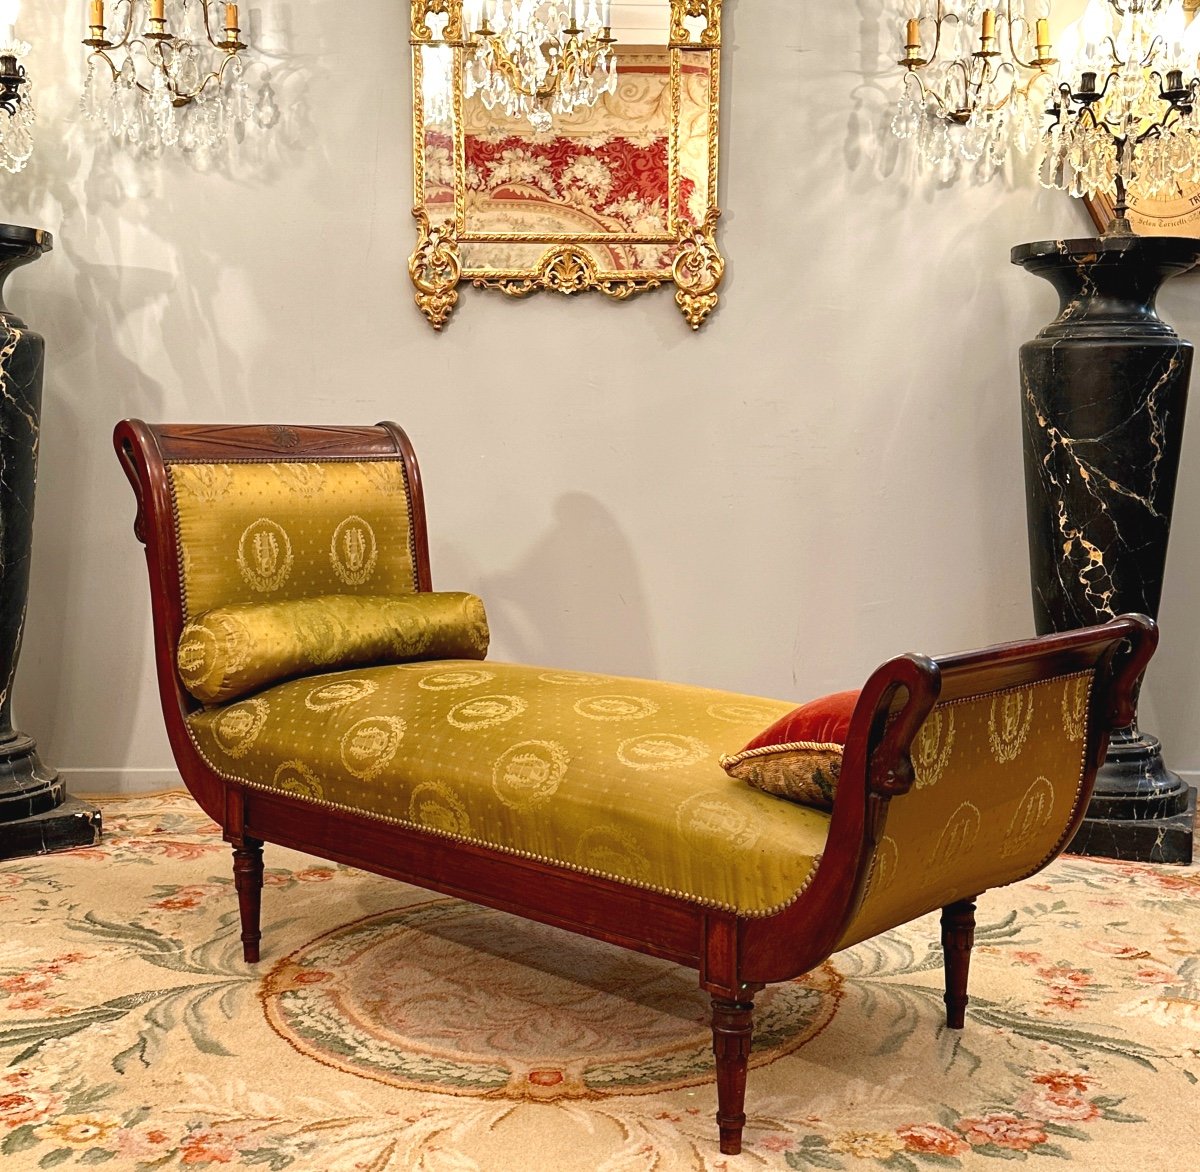 Jacob Frères, Meridian Rest Bed In Mahogany Directoire Period Around 1795